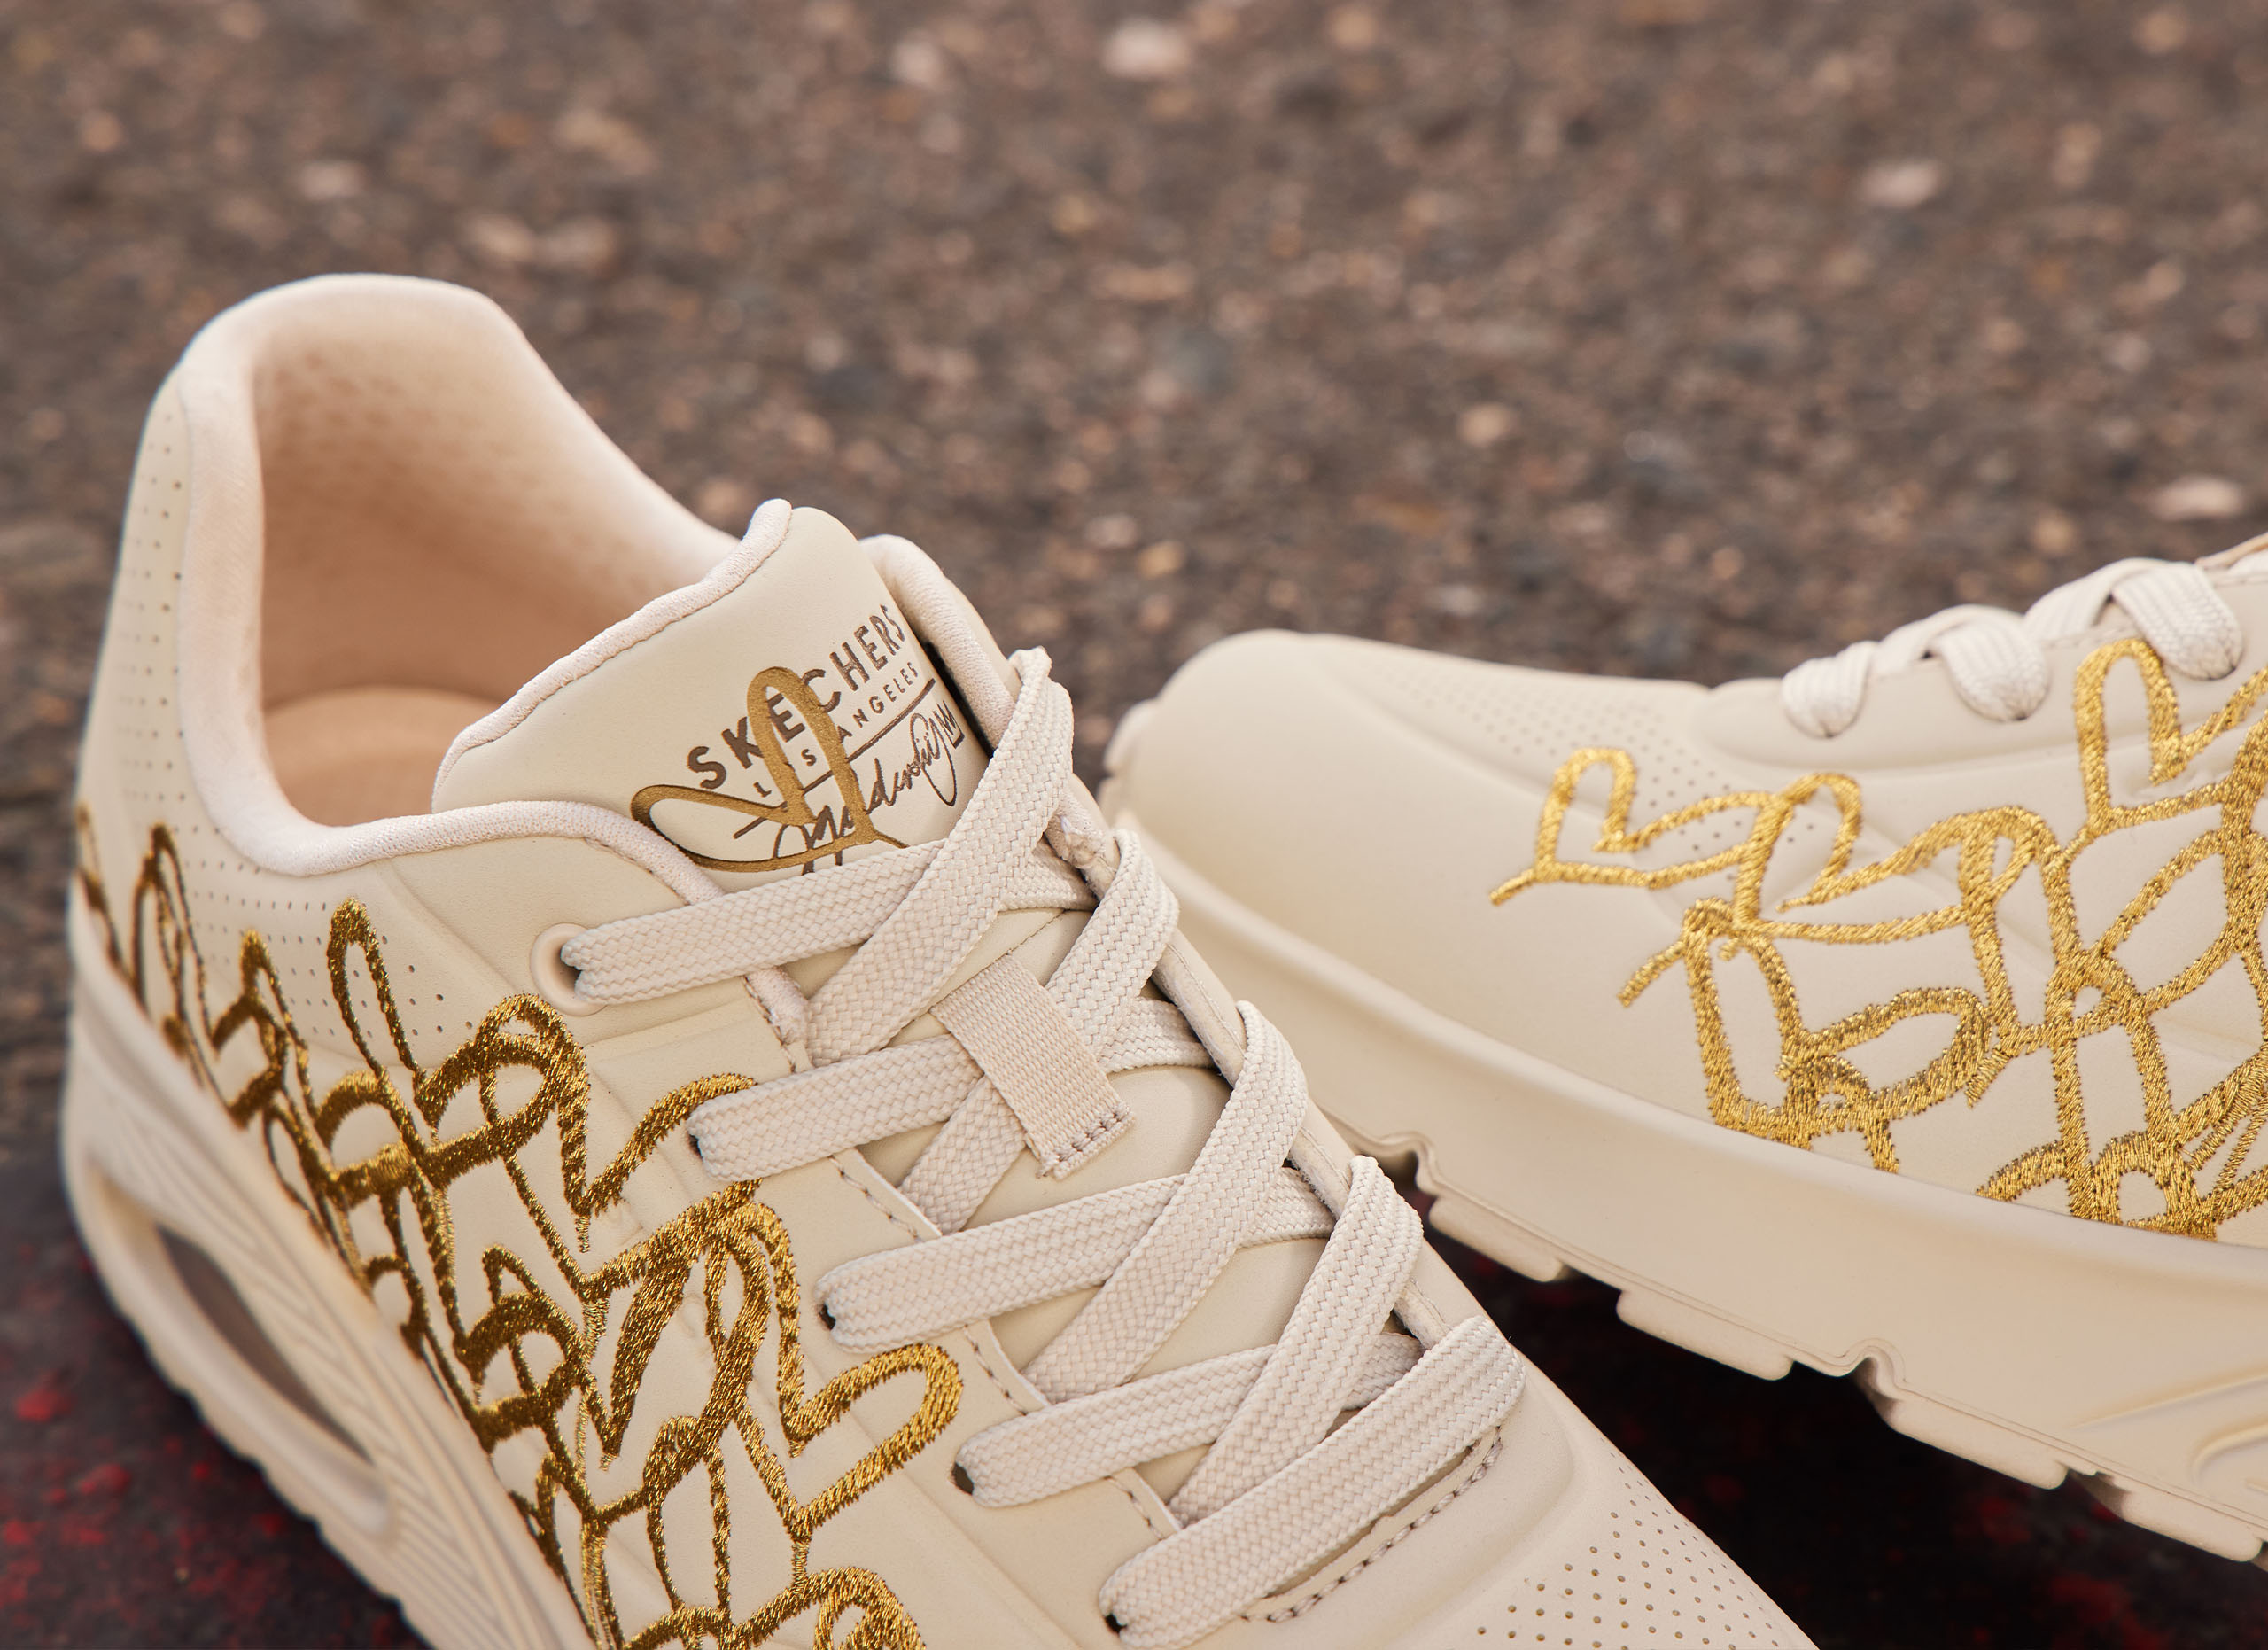 James Goldcrown brings his iconic Love Wall heart design to skechers